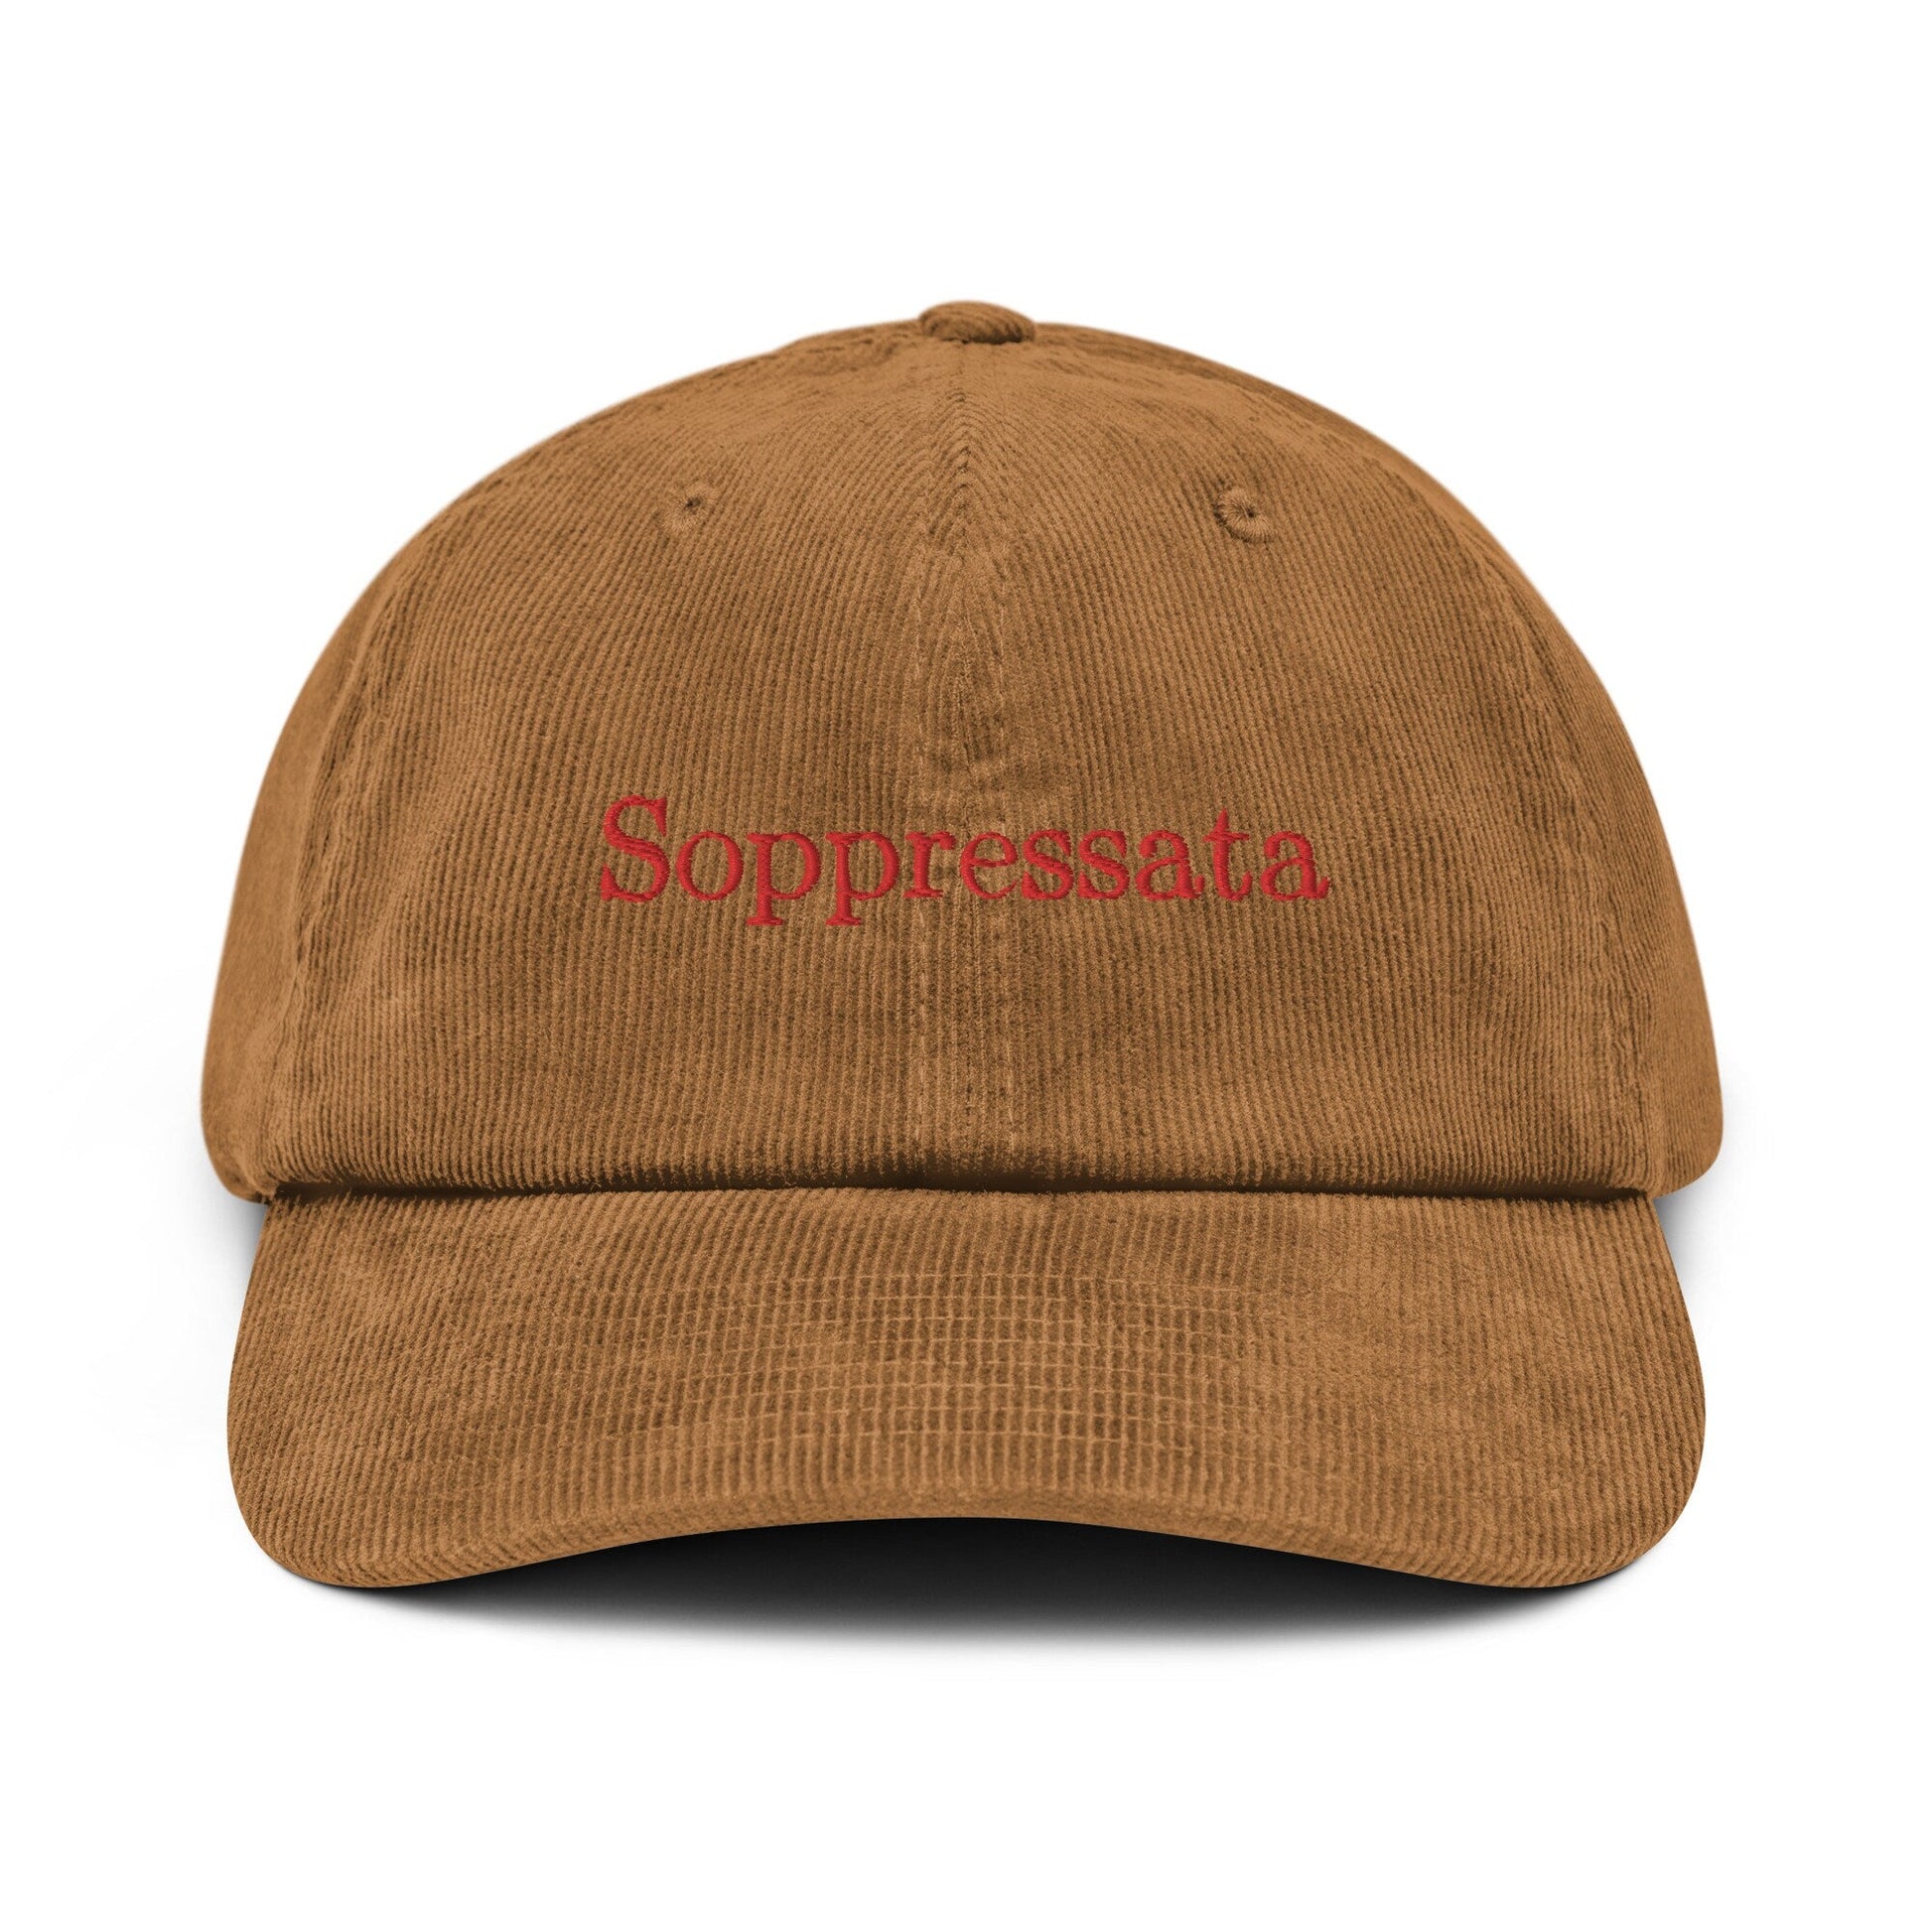 Soppressata Corduroy Dad Hat - Gift for Italian charcuterie and cheese food Lovers - Handmade Embroidered Cap - Evilwater Originals